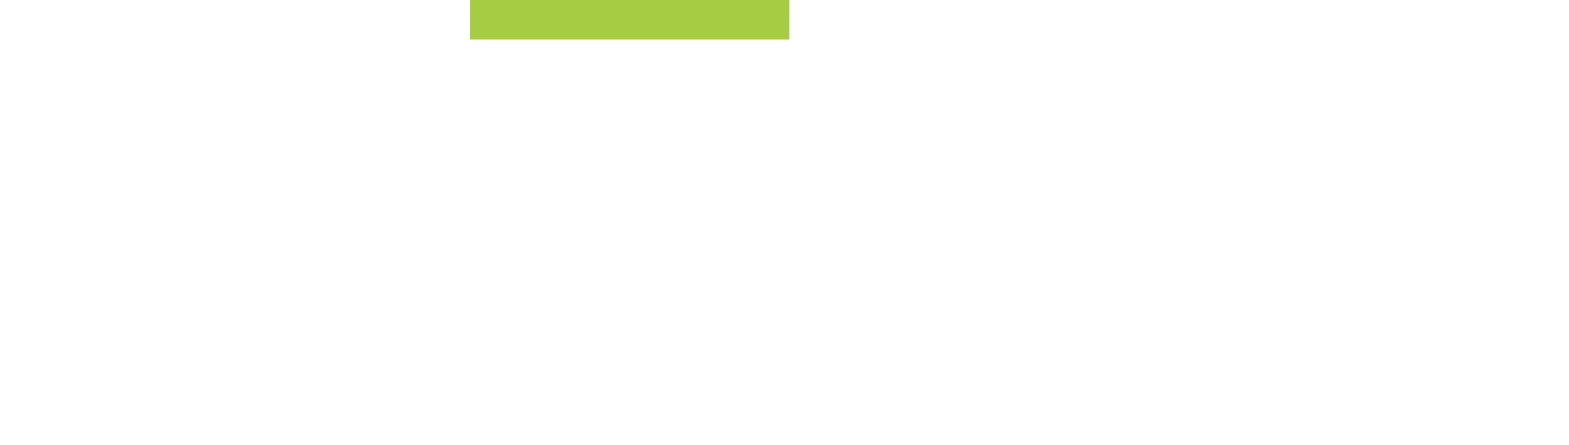 Inuvo logo large for dark backgrounds (transparent PNG)